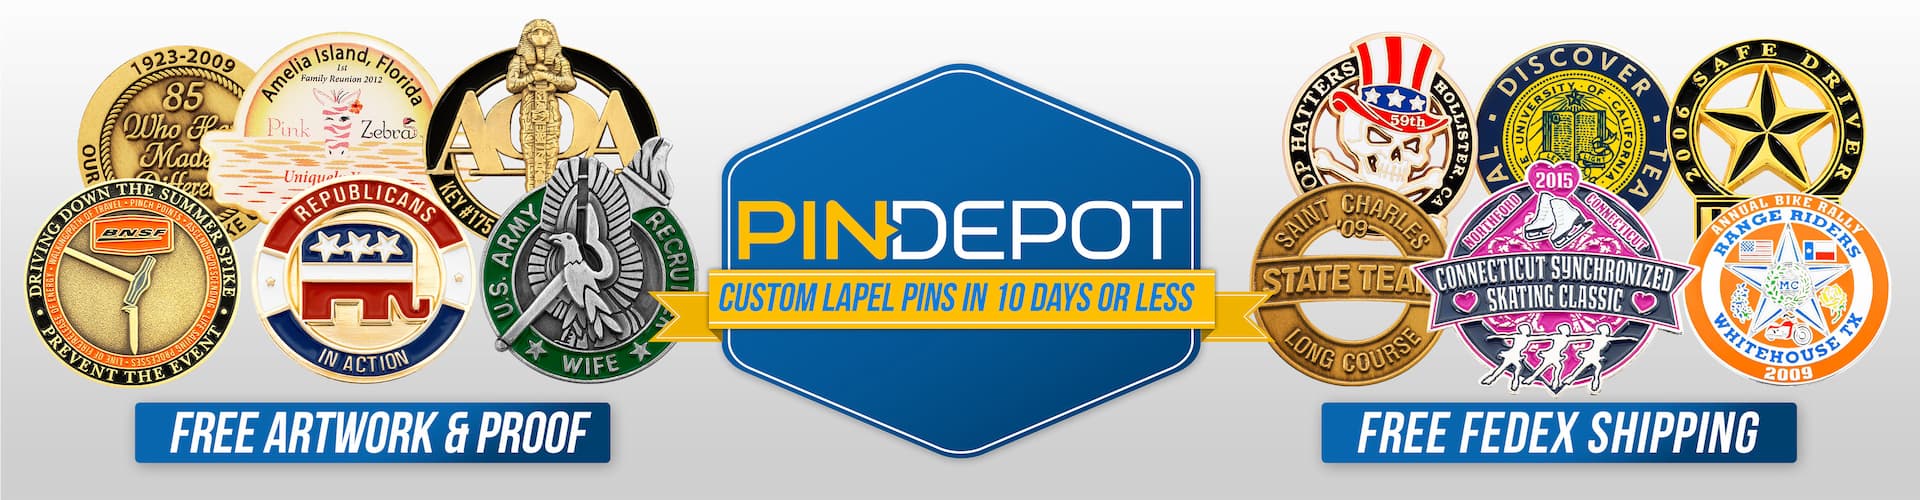 Welcome to Pin Depot - Custom Lapel Pins Near Me